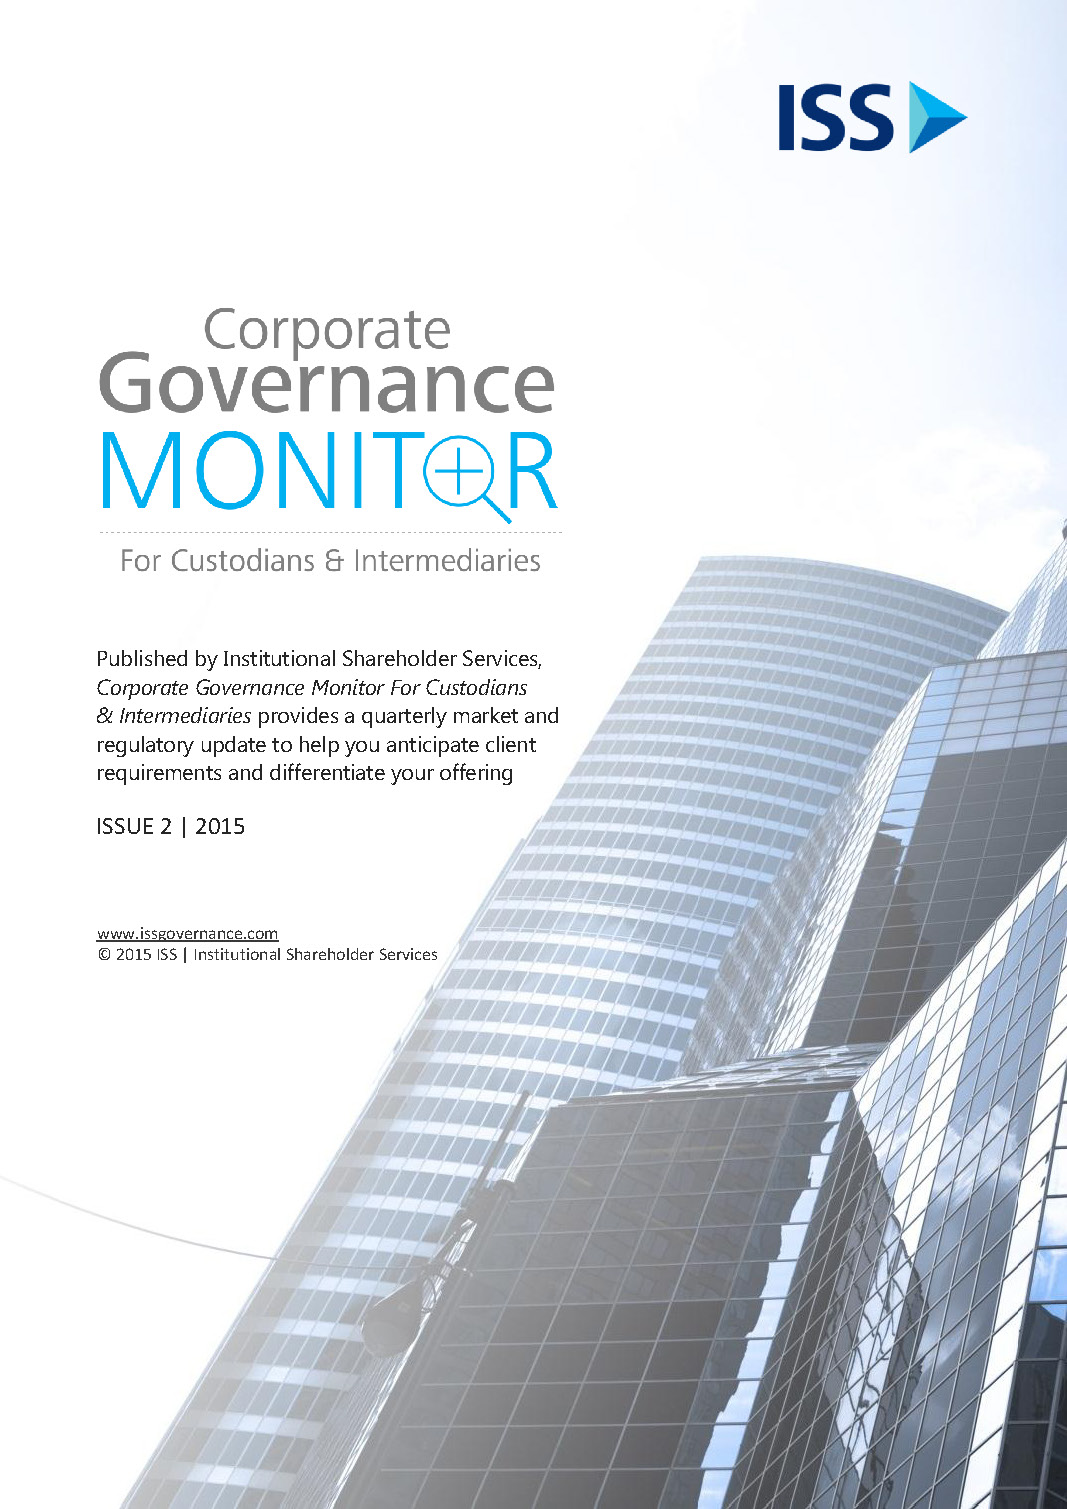 ISS Corporate Governance Monitor – Issue 2